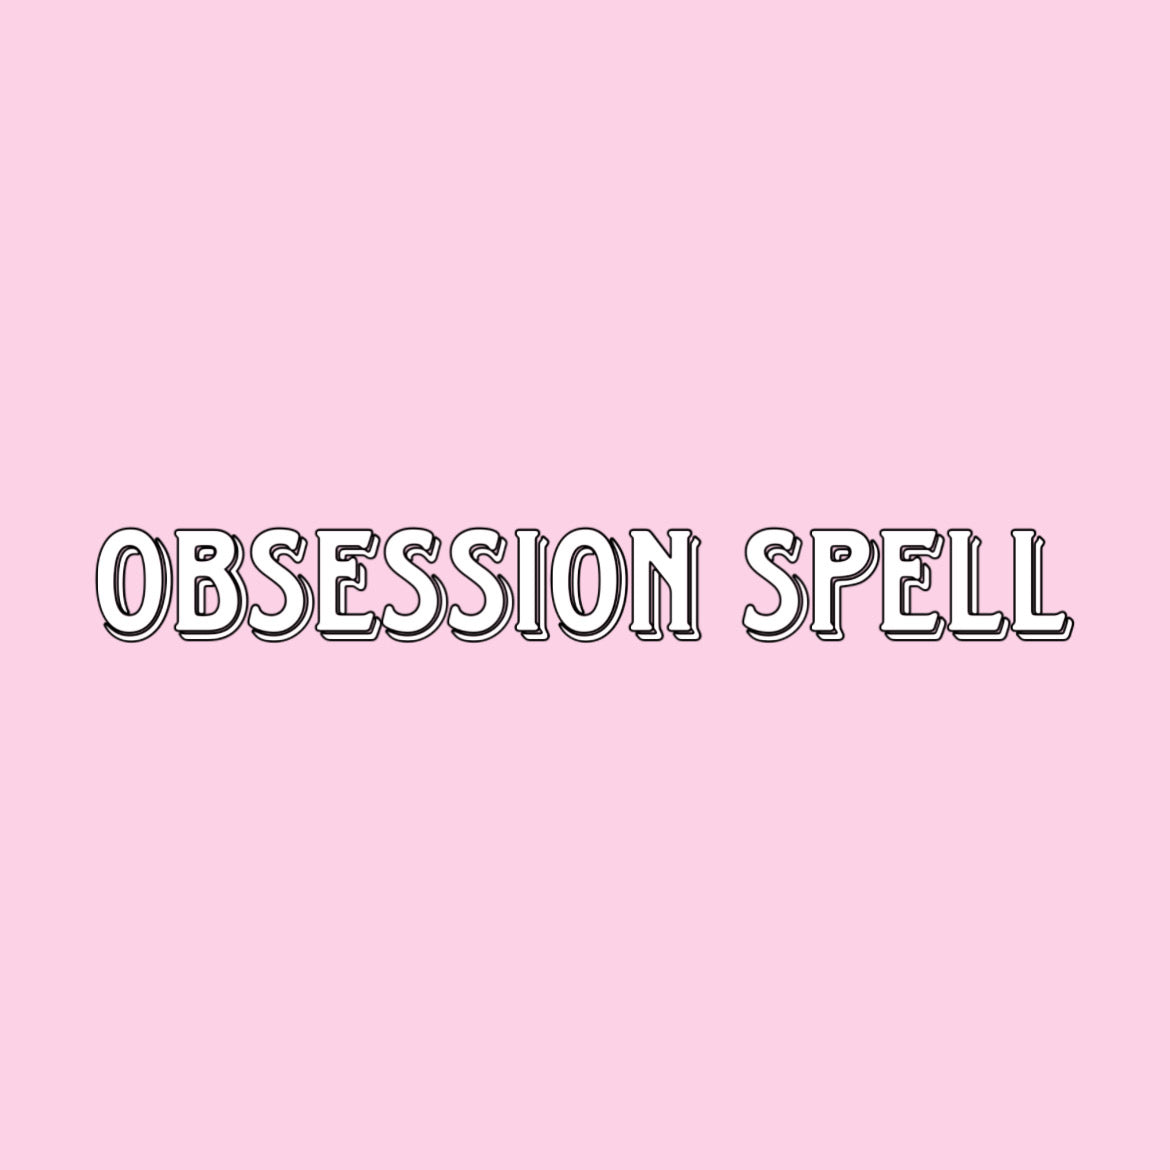 be obsessed with me 💋 - obsession spell *requires consultation*